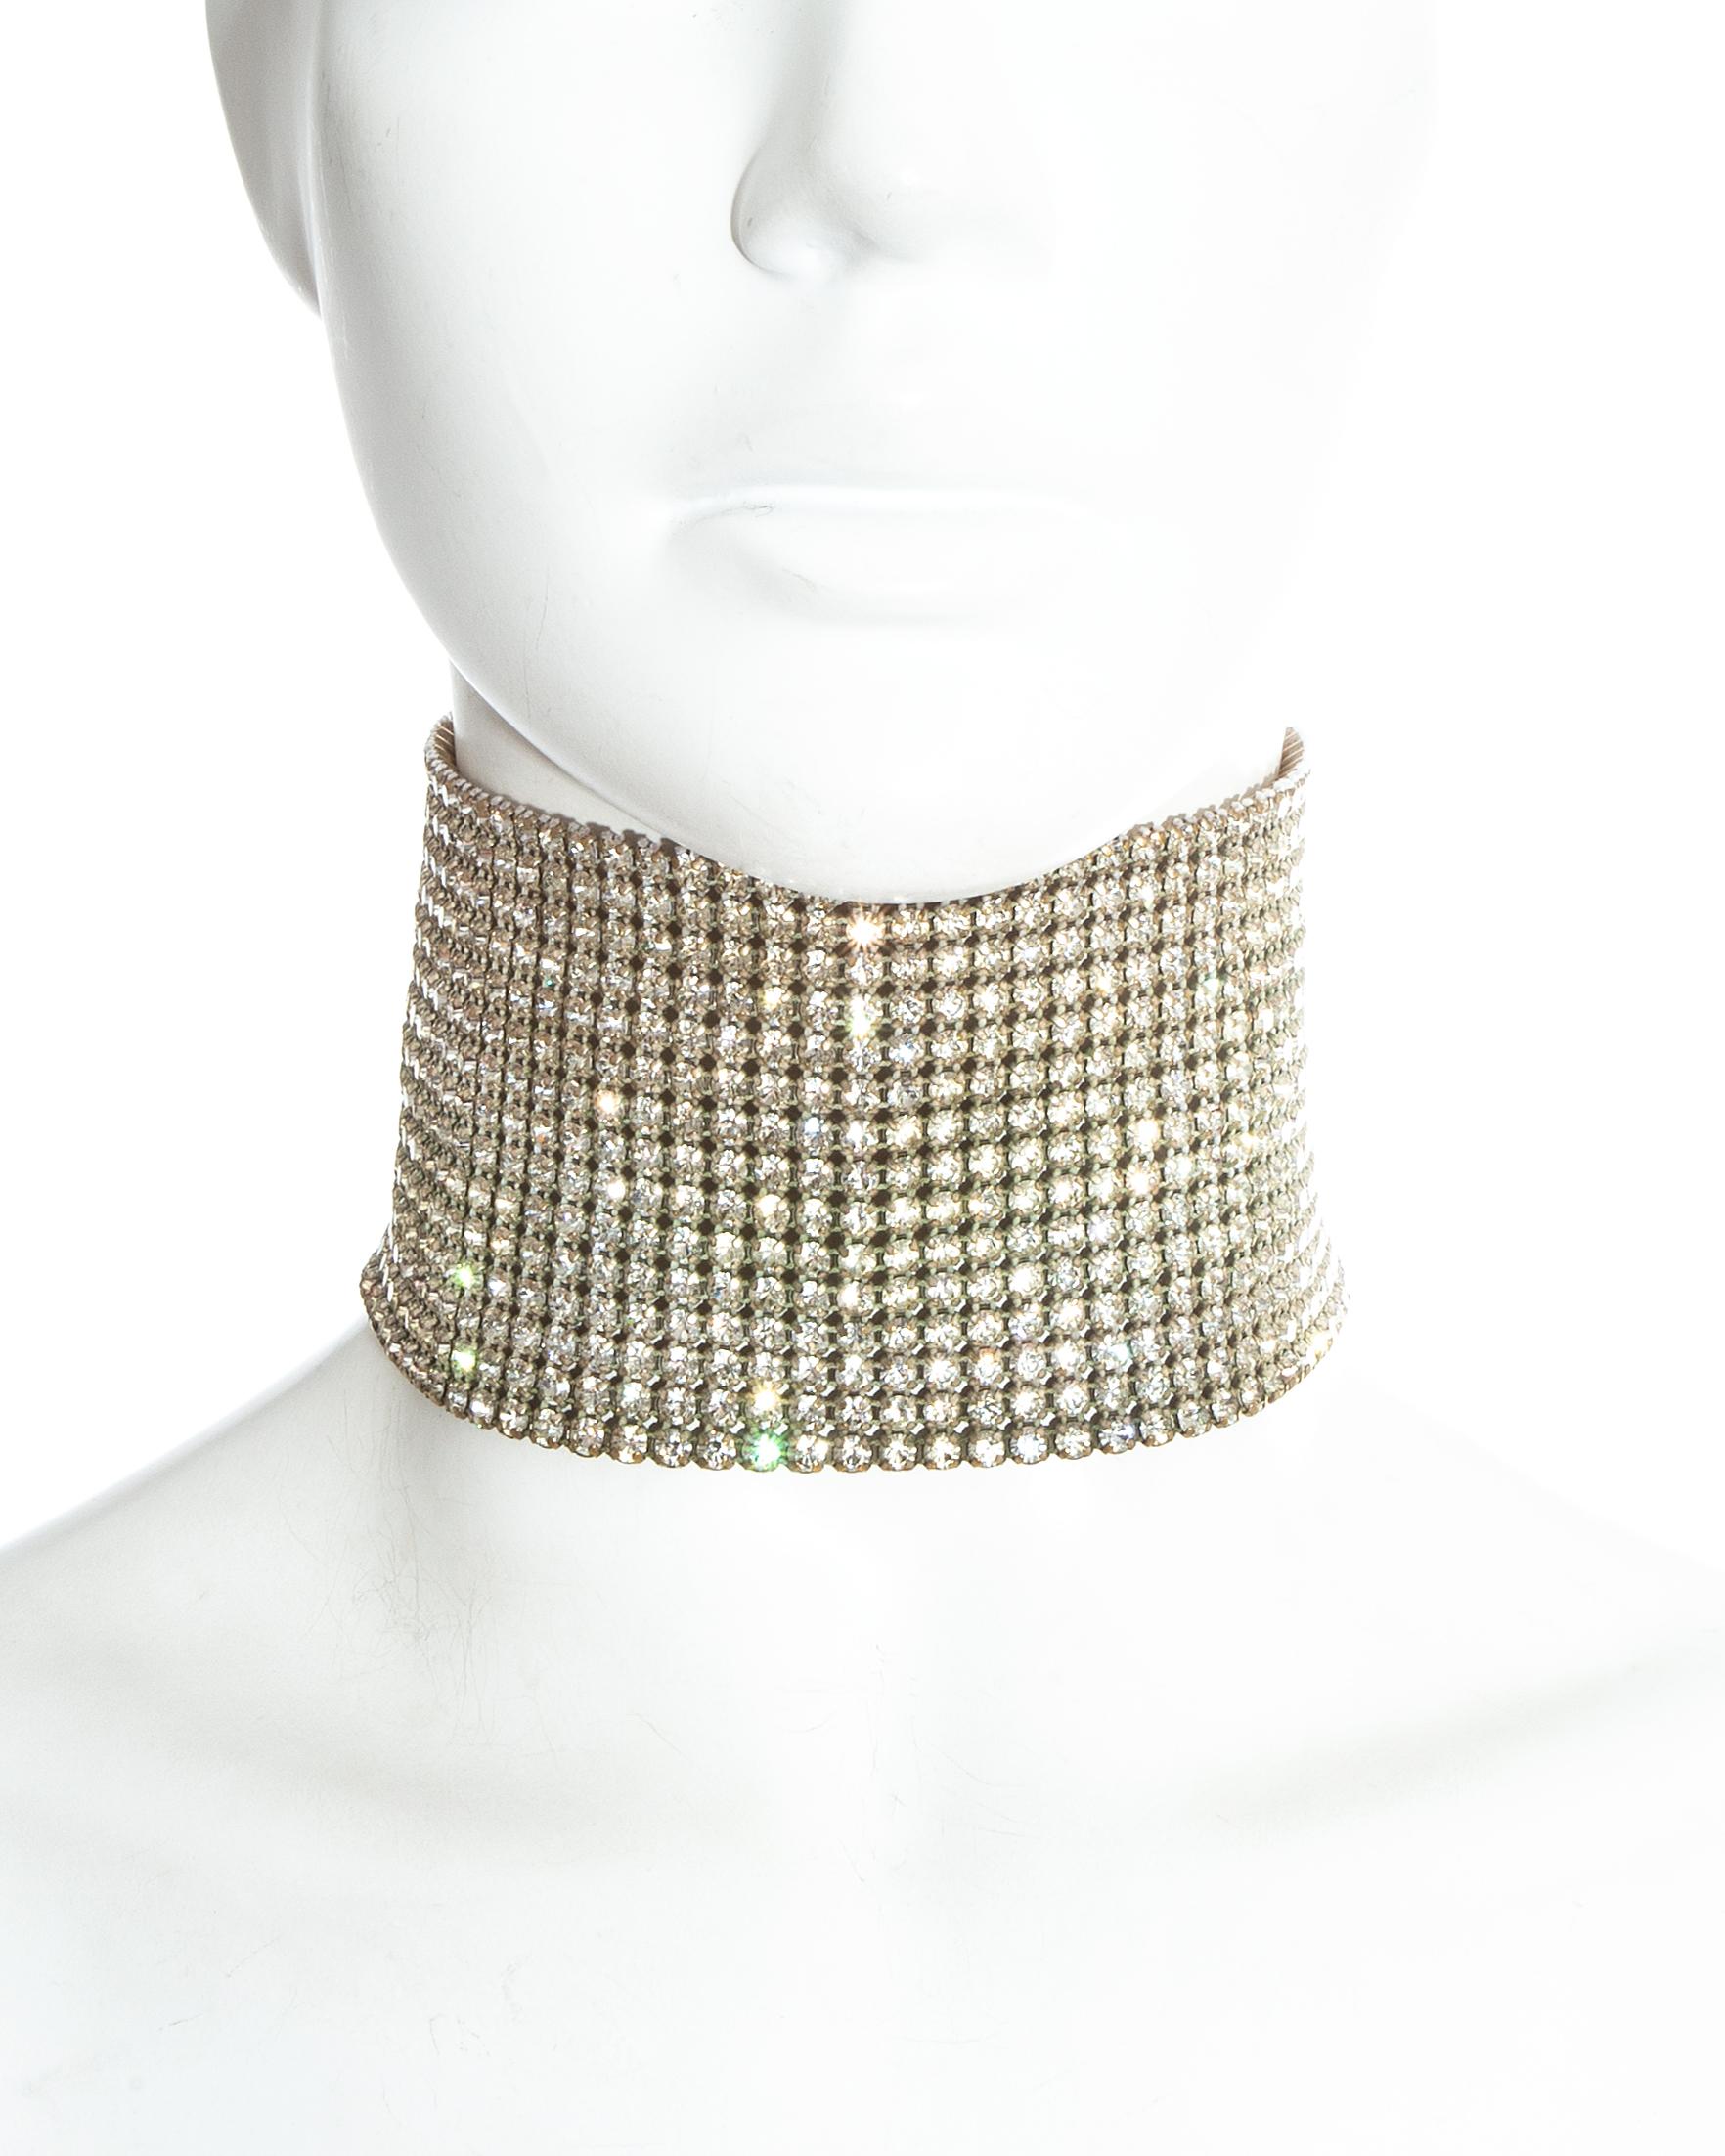 Dolce & Gabbana silver crystal mesh choker necklace with velcro fastening.

Spring-Summer 2000